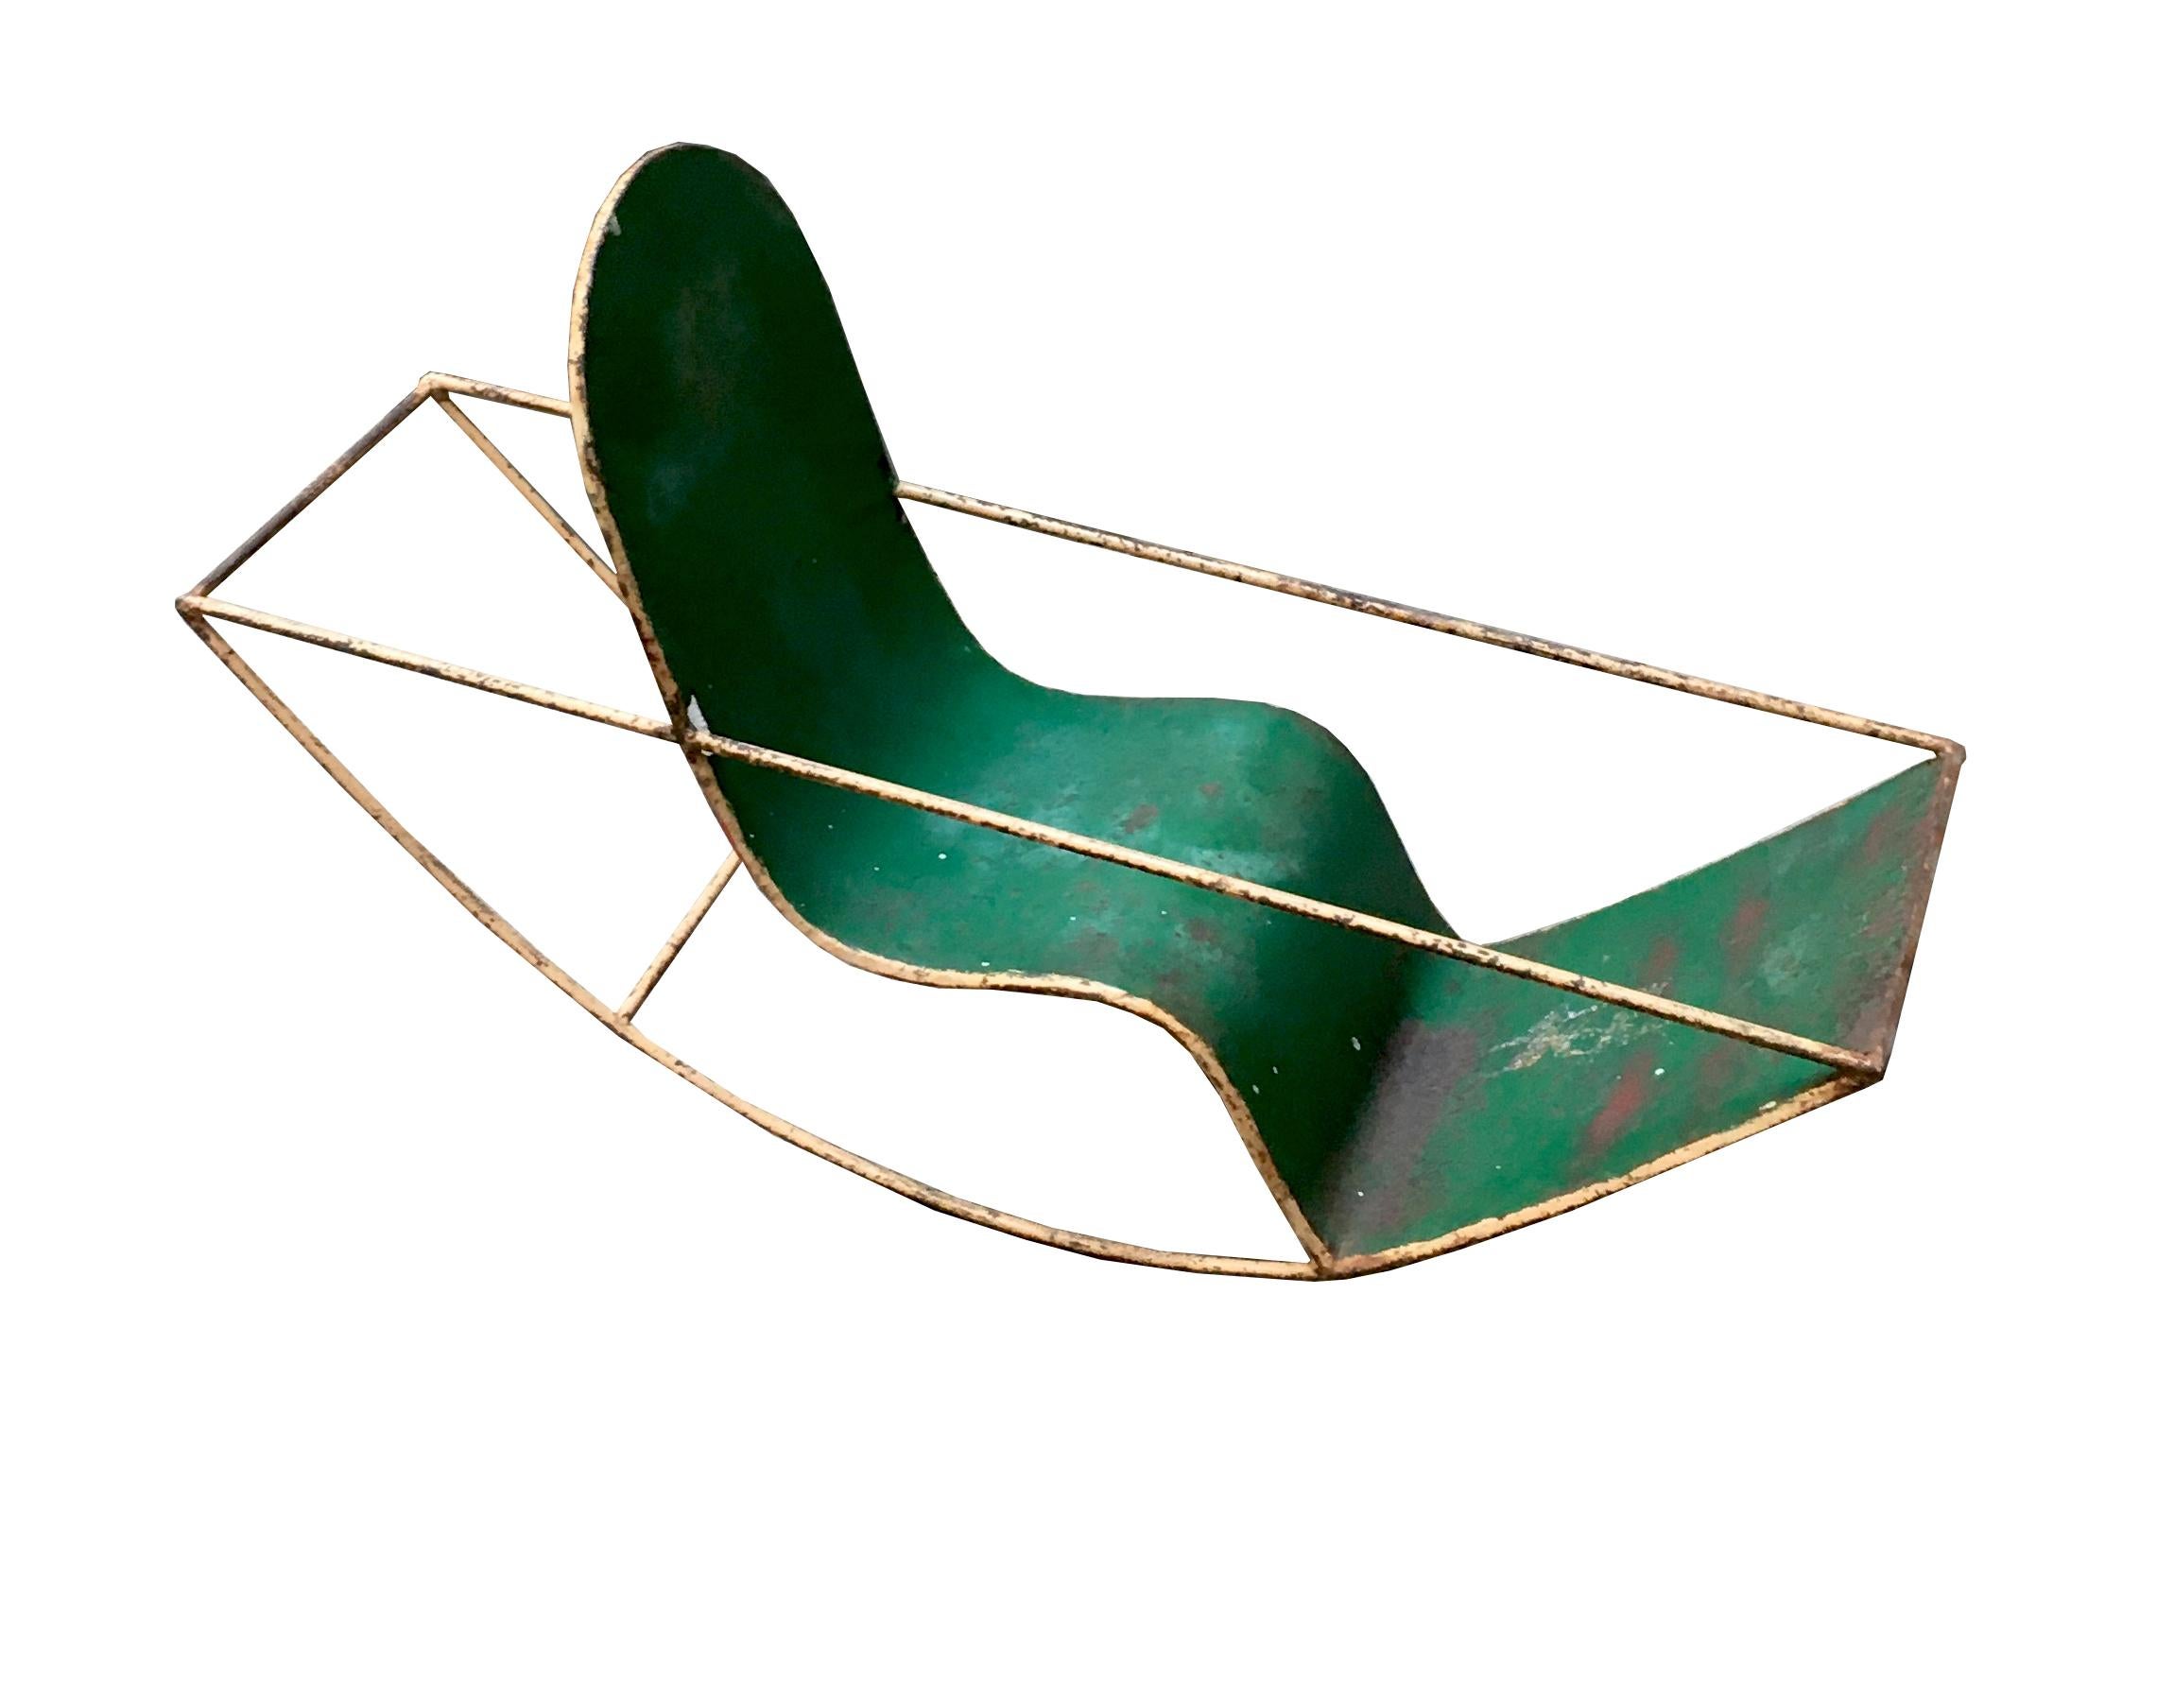 Very rare grenn metal rocking chair for children made in Italy in the 1950s, in the style of Ico Parisi for Sampietro.